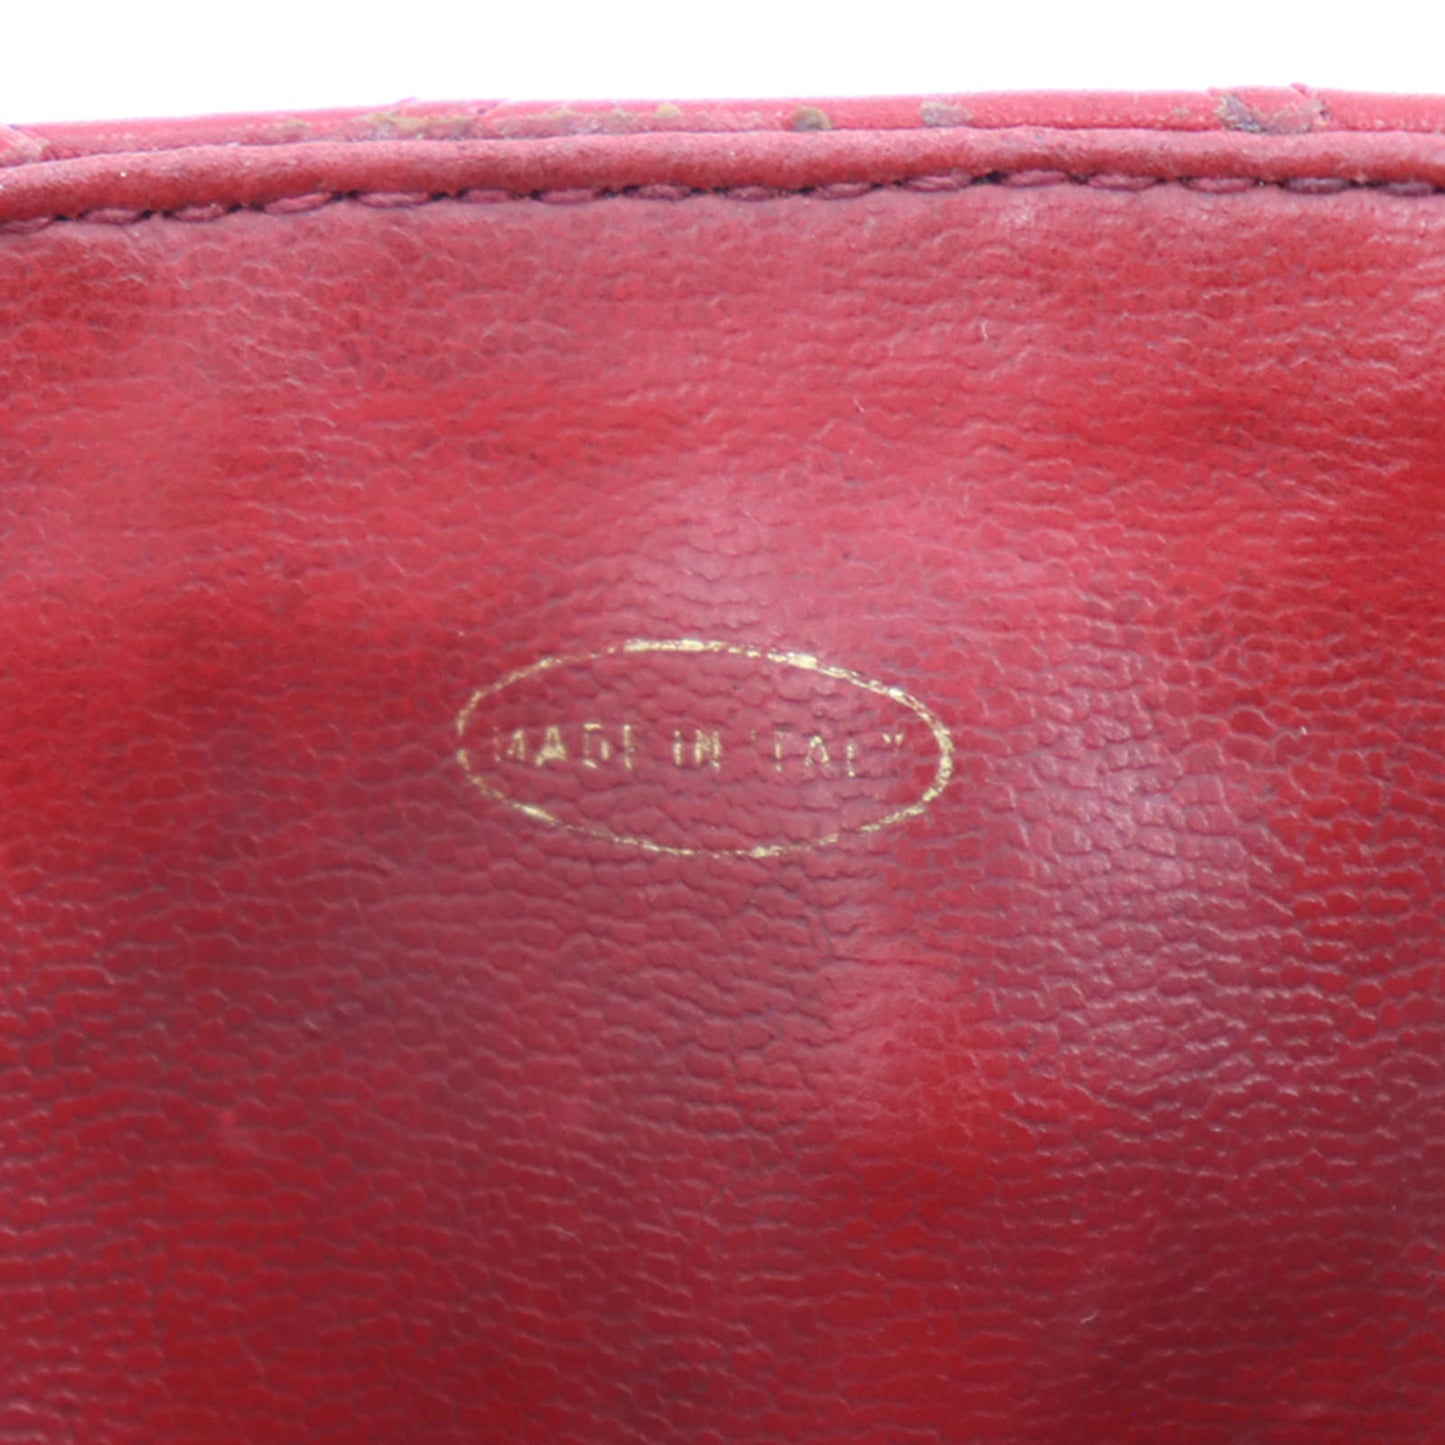 CHANEL Bicolore Bum Bag Red Leather Lambskin #CK629